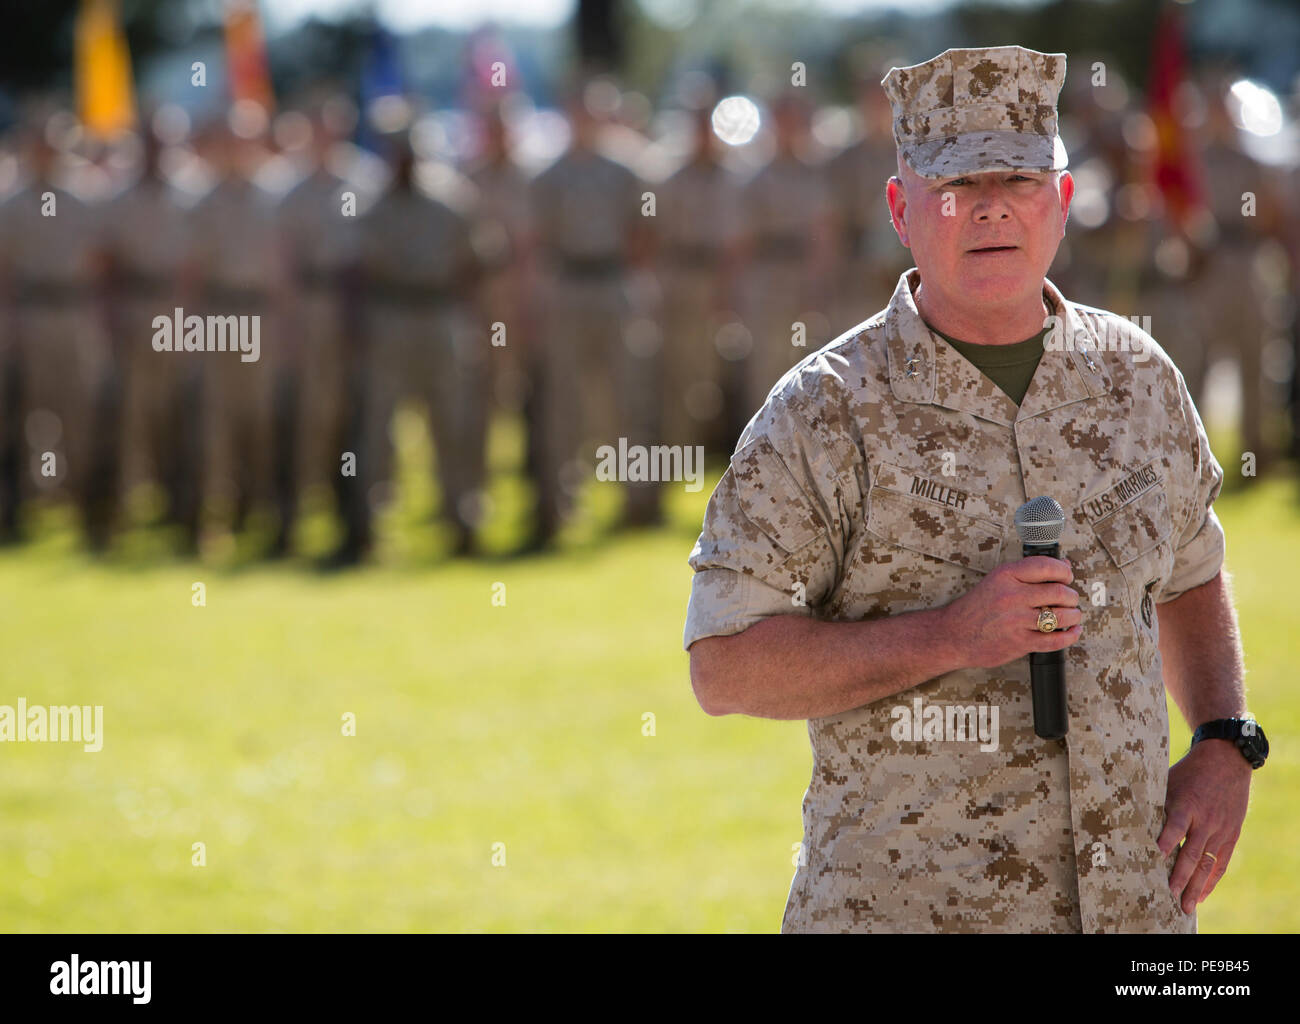 U.S. Marine Corps Maj. Gen. Walter L. Miller, Jr, commanding general, II Marine Expeditionary Force (II MEF), gives his remarks during the II MEF change of command ceremony on Camp Lejeune, N.C., Oct. 22, 2015. Maj. Gen. William D. Beydler, off going commanding general, II MEF, relinquished command to Miller, Jr. (U.S. Marine Corps photo by Lance Cpl. Chloe Nelson, 2nd MARDIV, Combat Camera/Released) Stock Photo